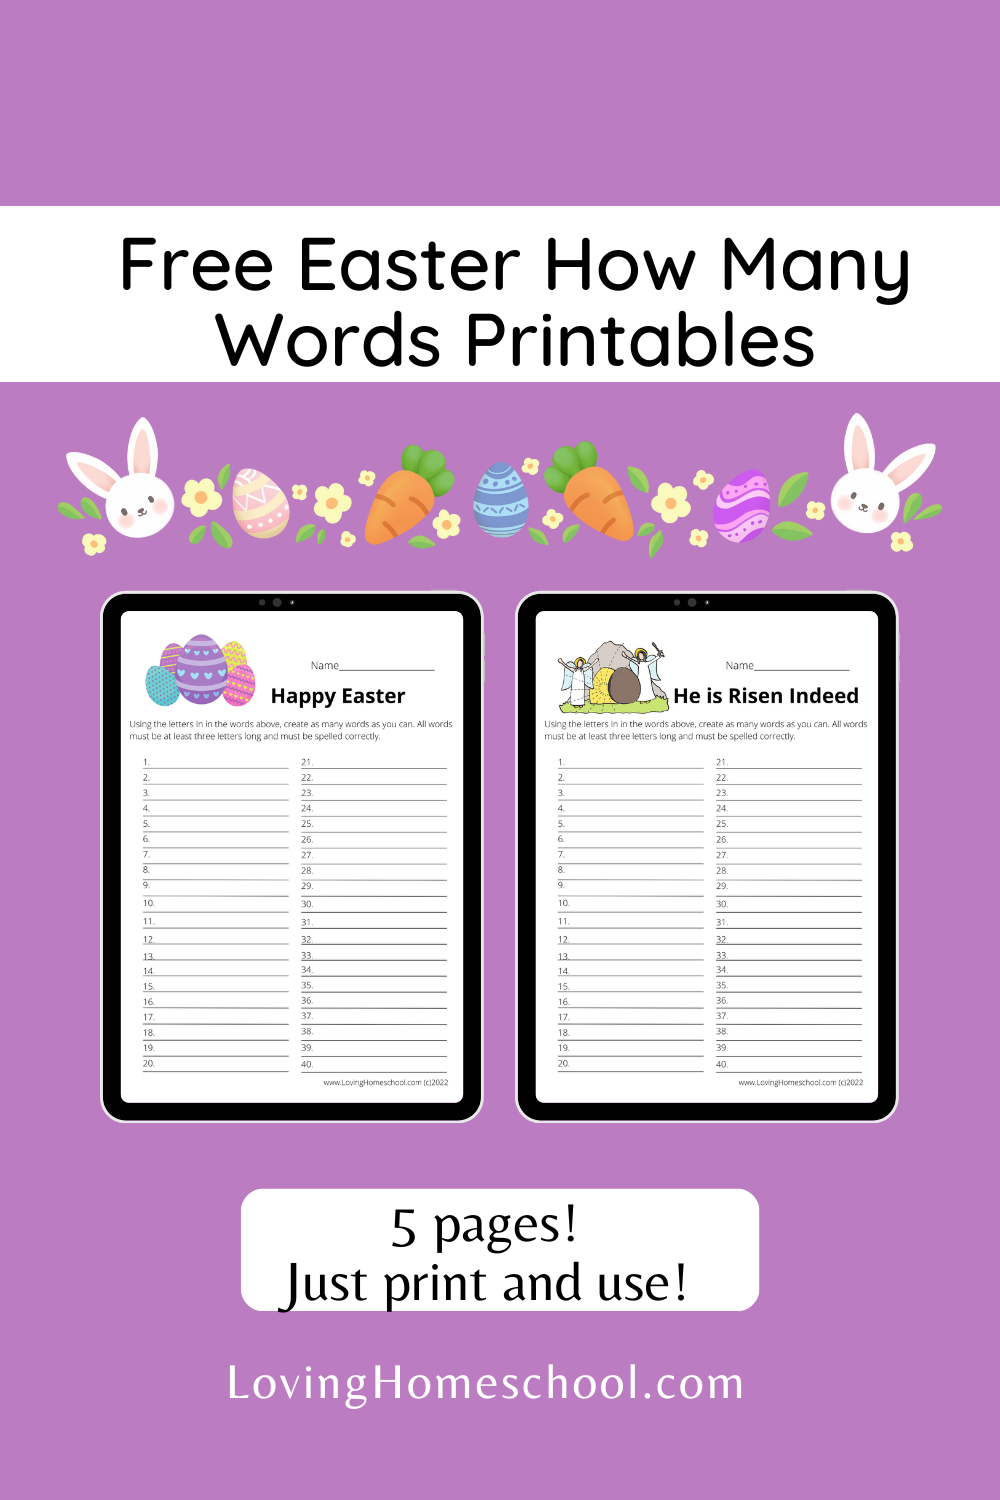 Free Easter How Many Words Printables Pinterest Pin